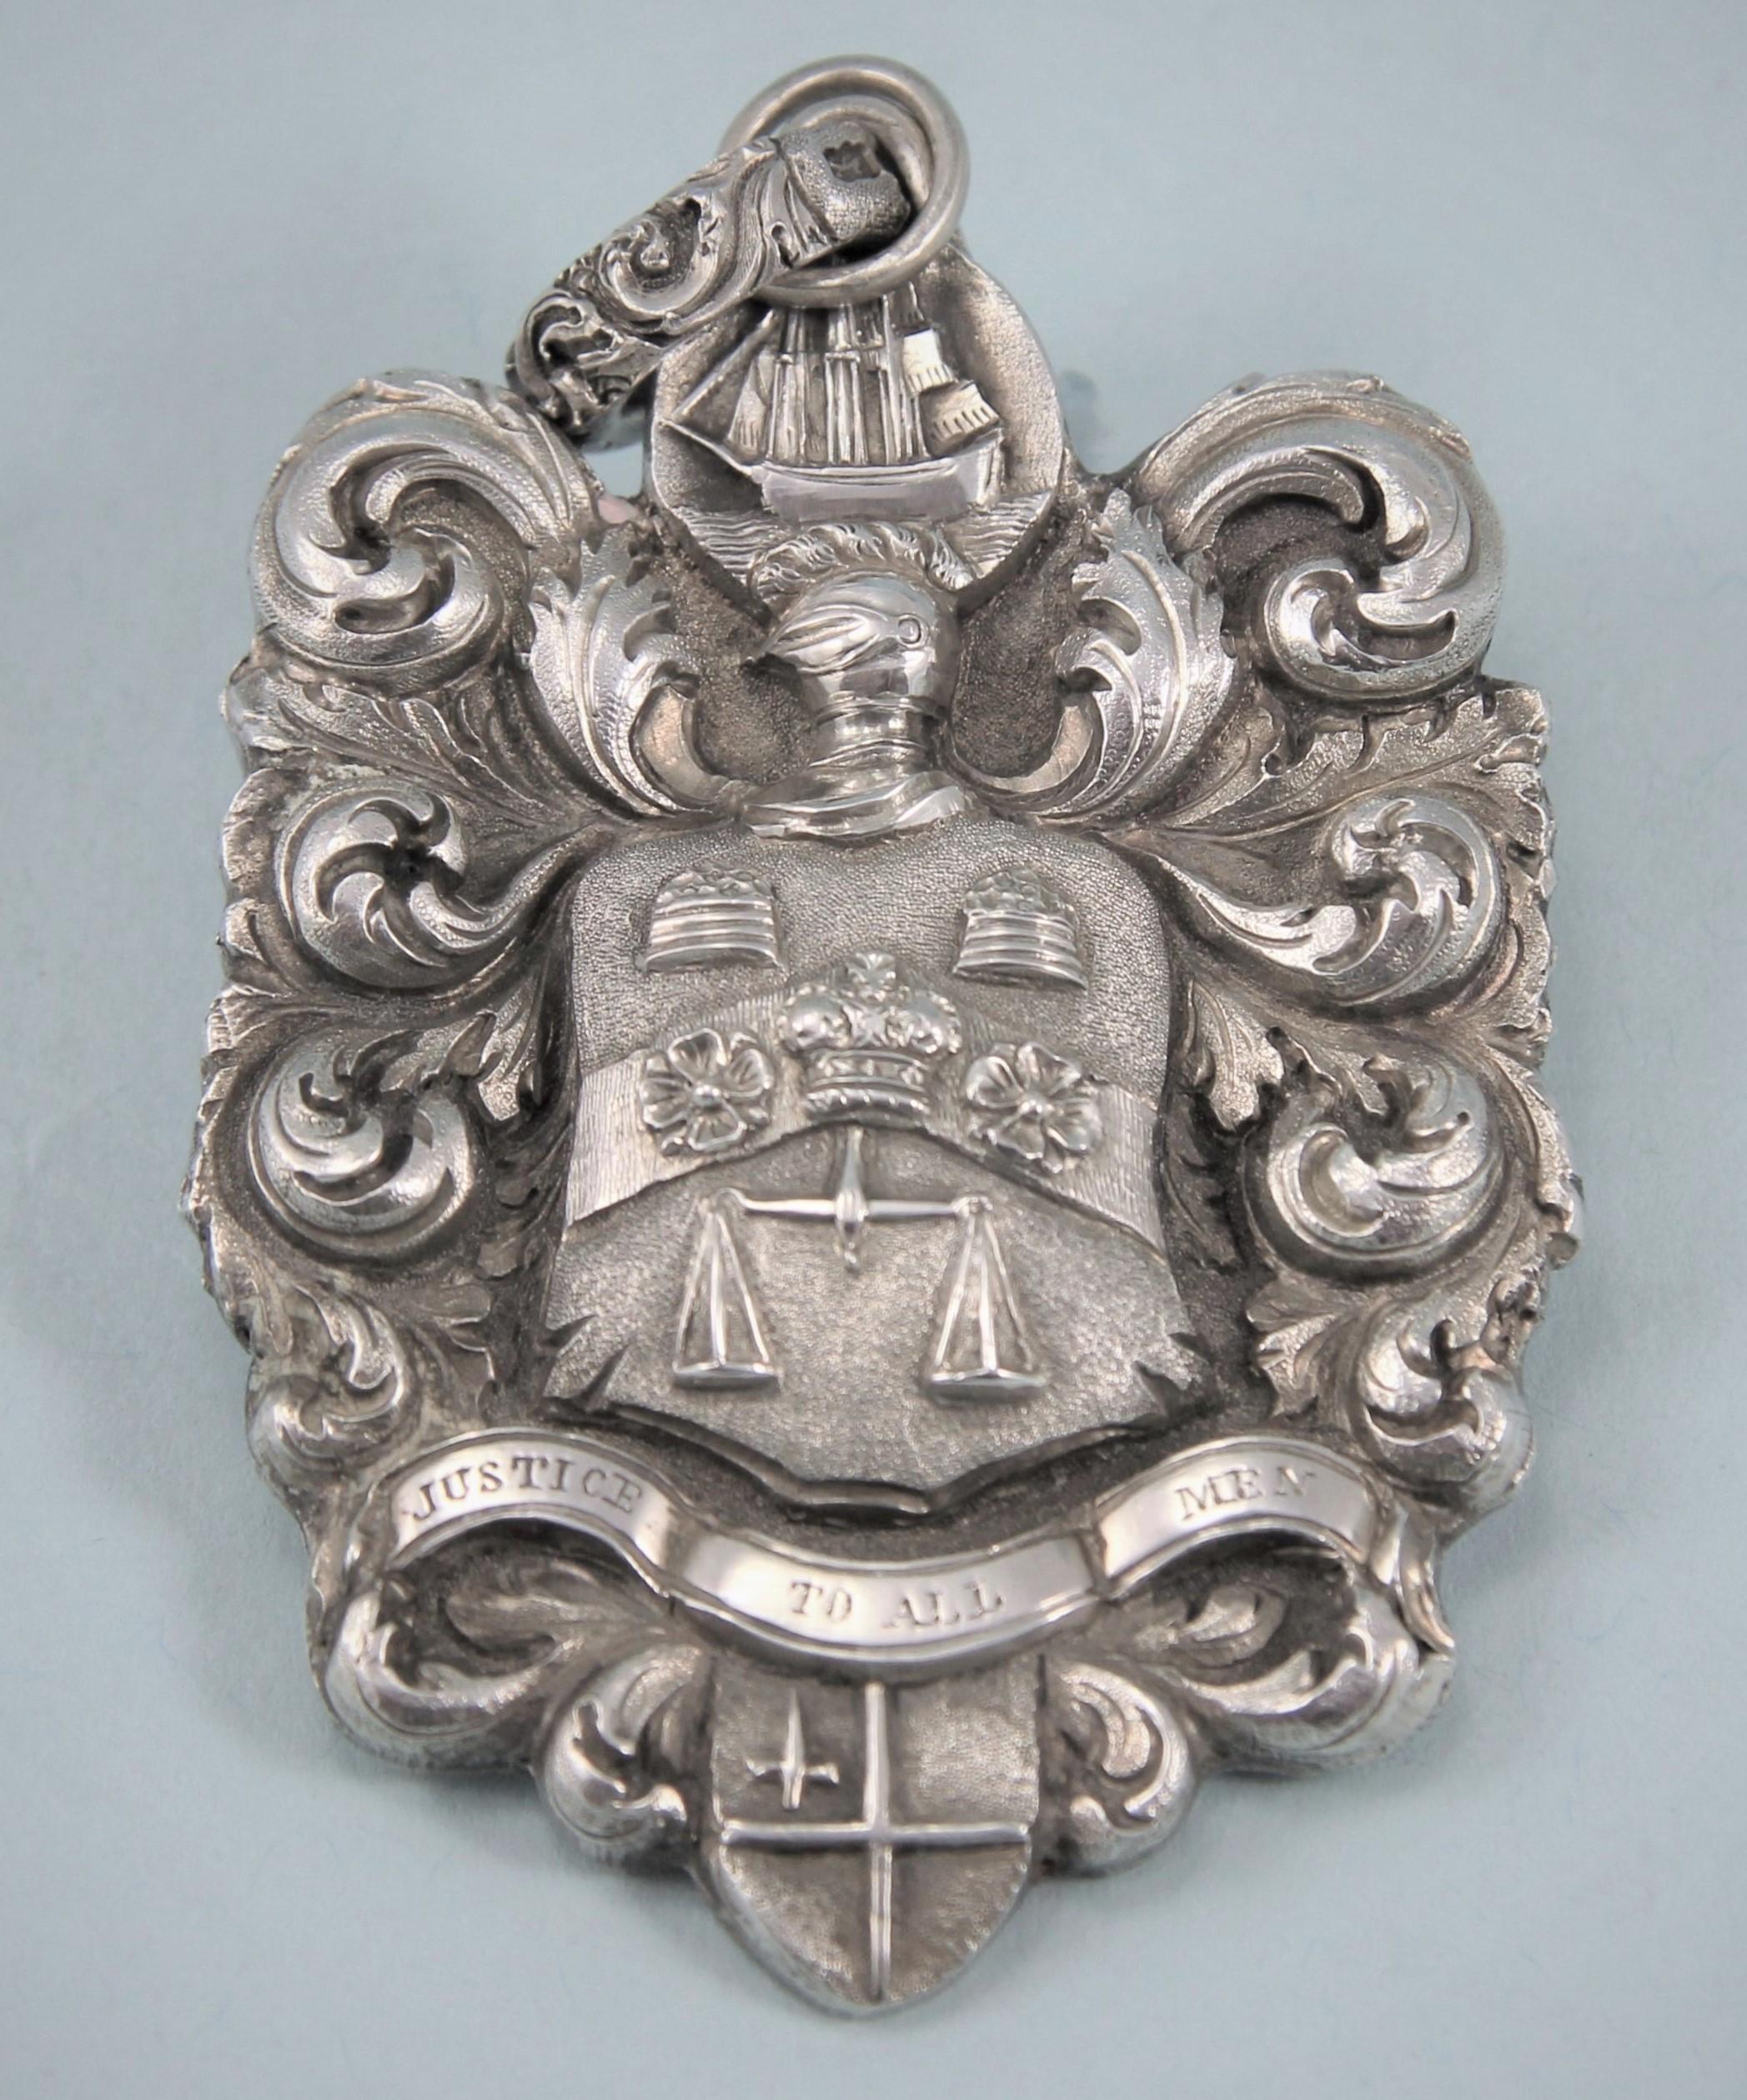 Interesting George IV silver sea-coal meter badge. Unmarked.
Maker's mark AD stamped on the ring attachment. England, circa 1824. 

The badge is of shaped form with foliate scroll decoration and an armorial with motto beneath in the centre. The